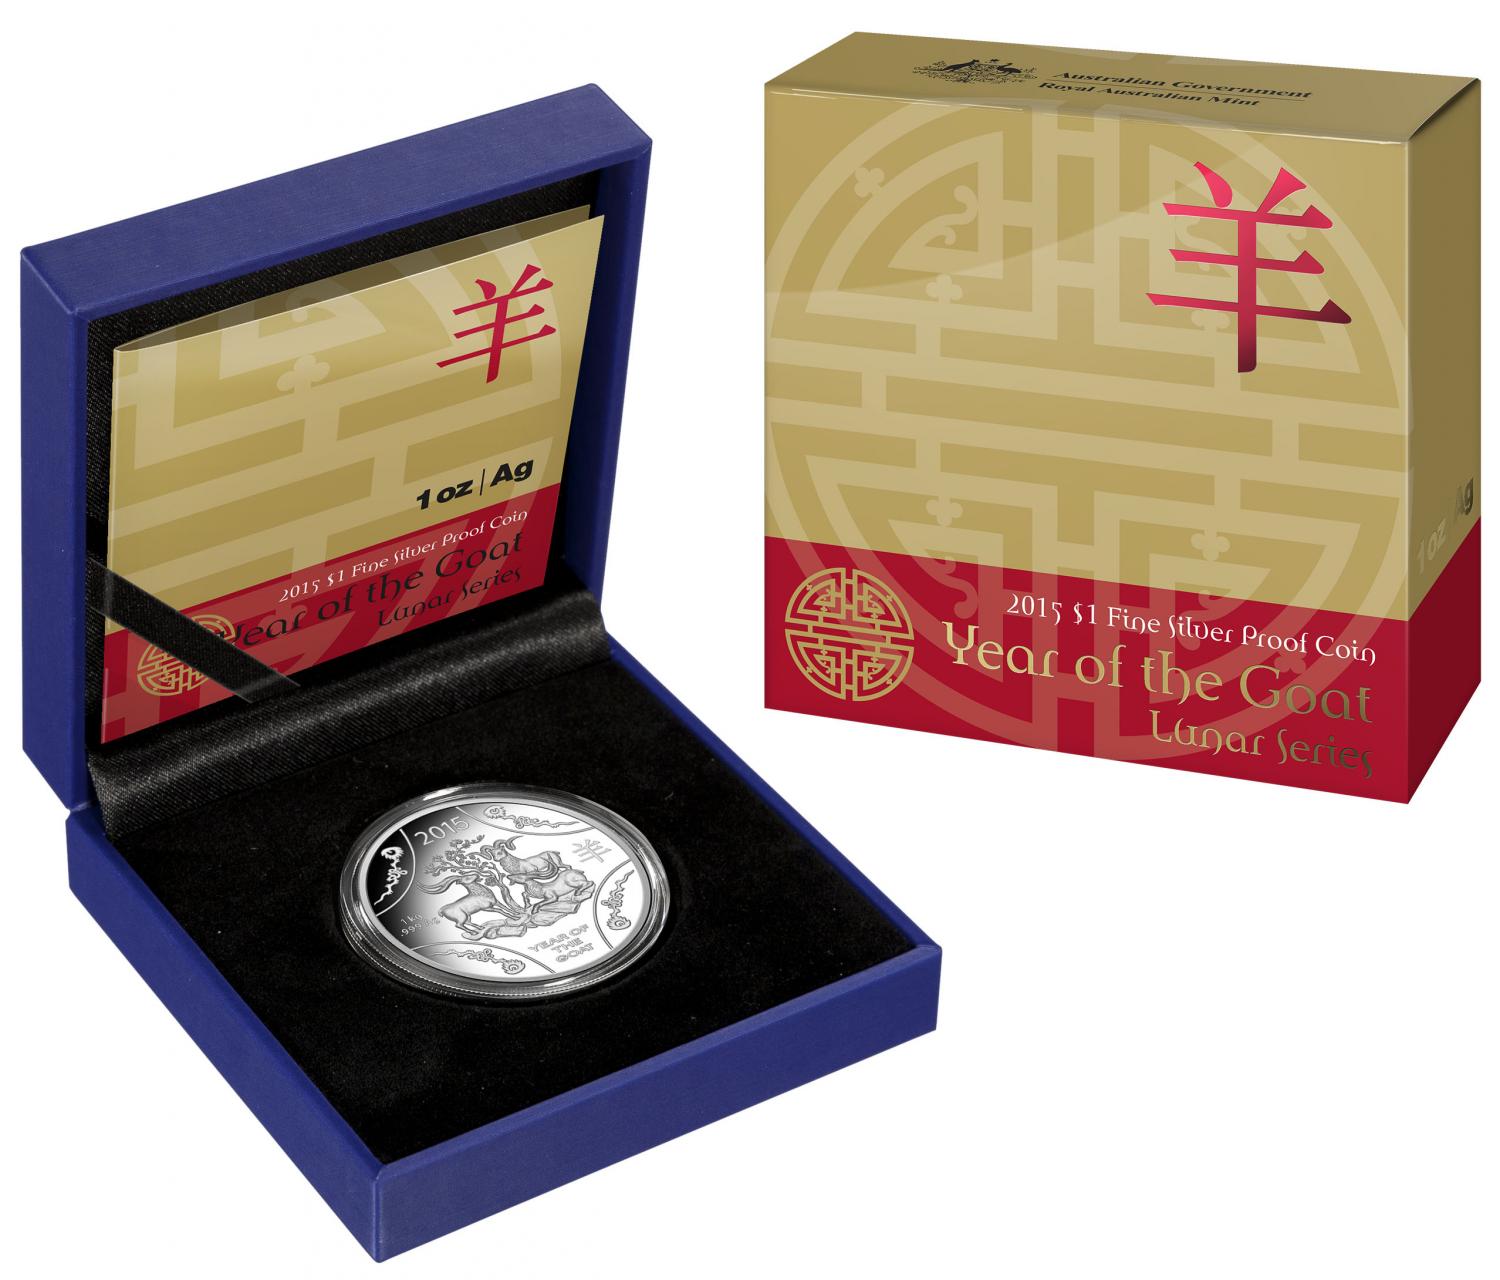 Thumbnail for 2015 Lunar Series - 1oz Year of the Goat $1 Silver Proof Coin 40mm Diam. - Blue Box